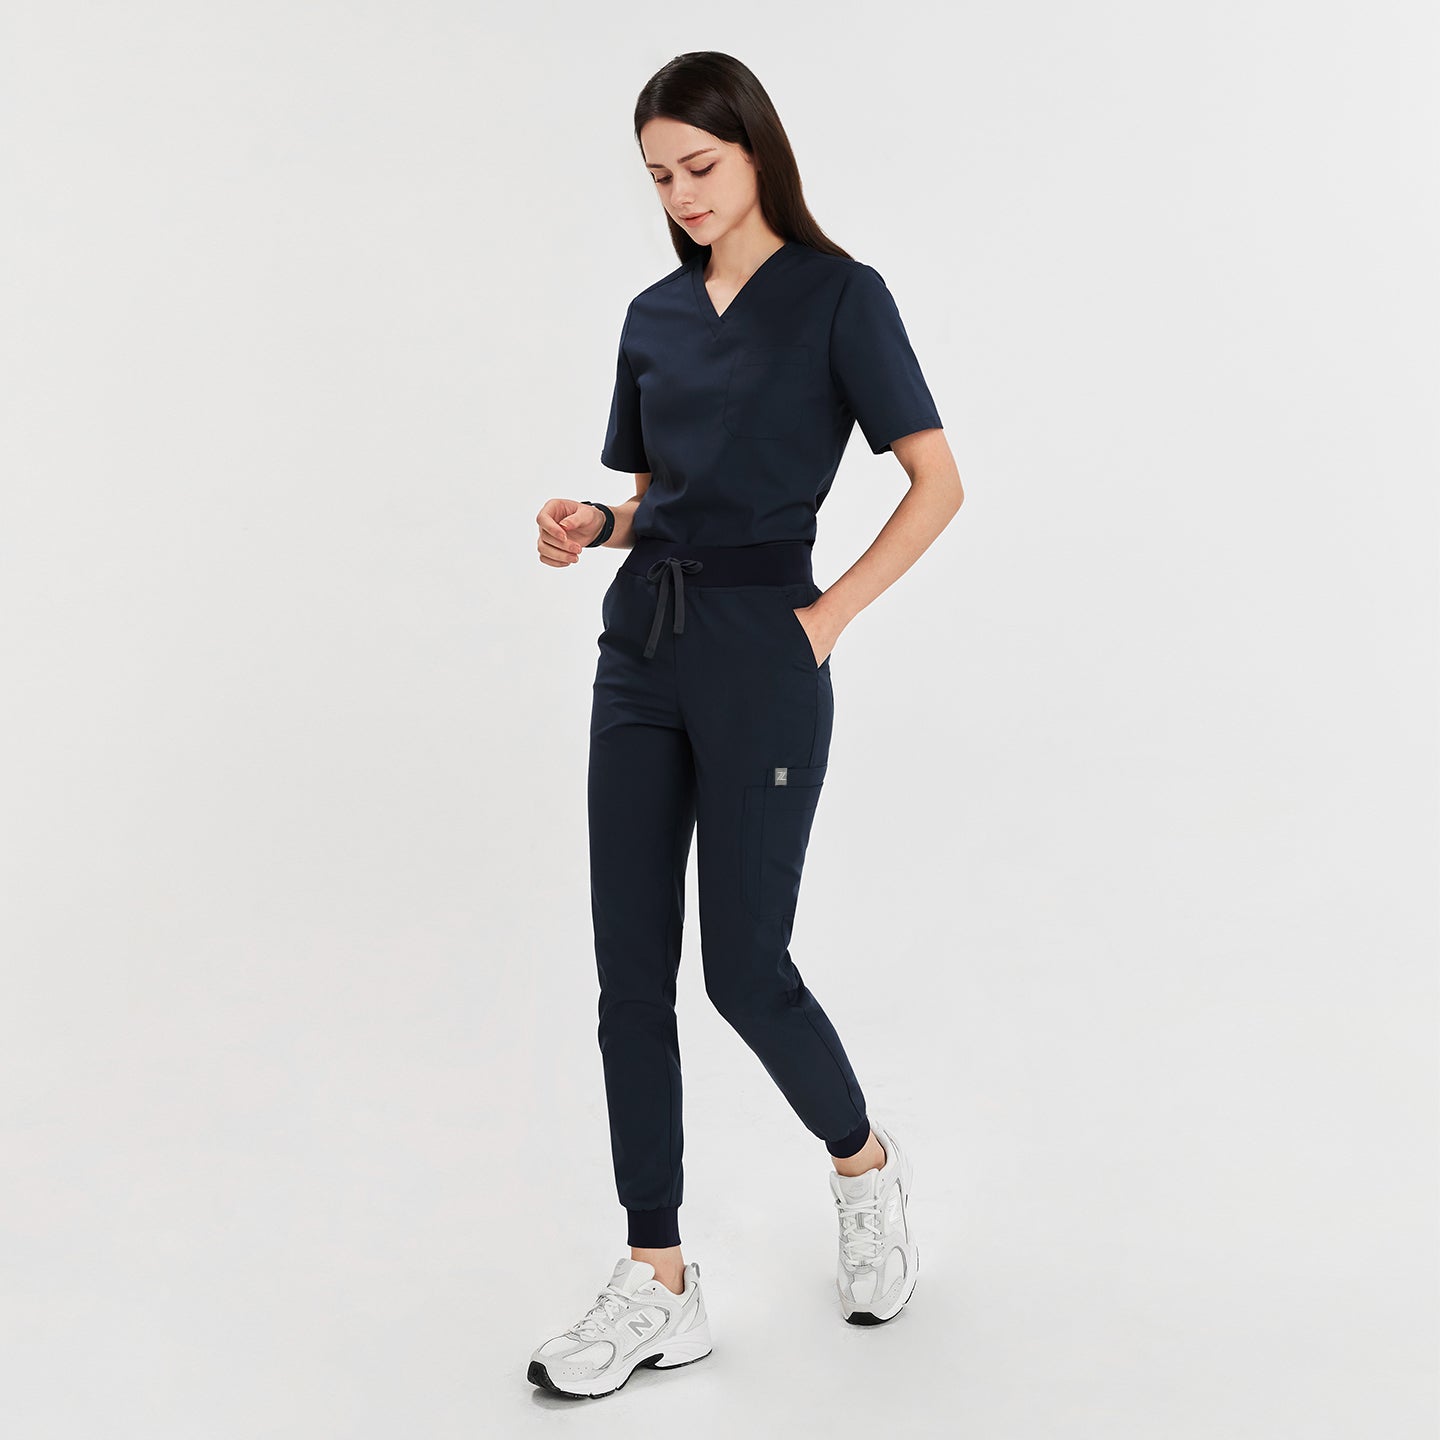  Full-body view of a model in navy jogger scrub pants with a drawstring waist, matching scrub top, and white sneakers,Navy